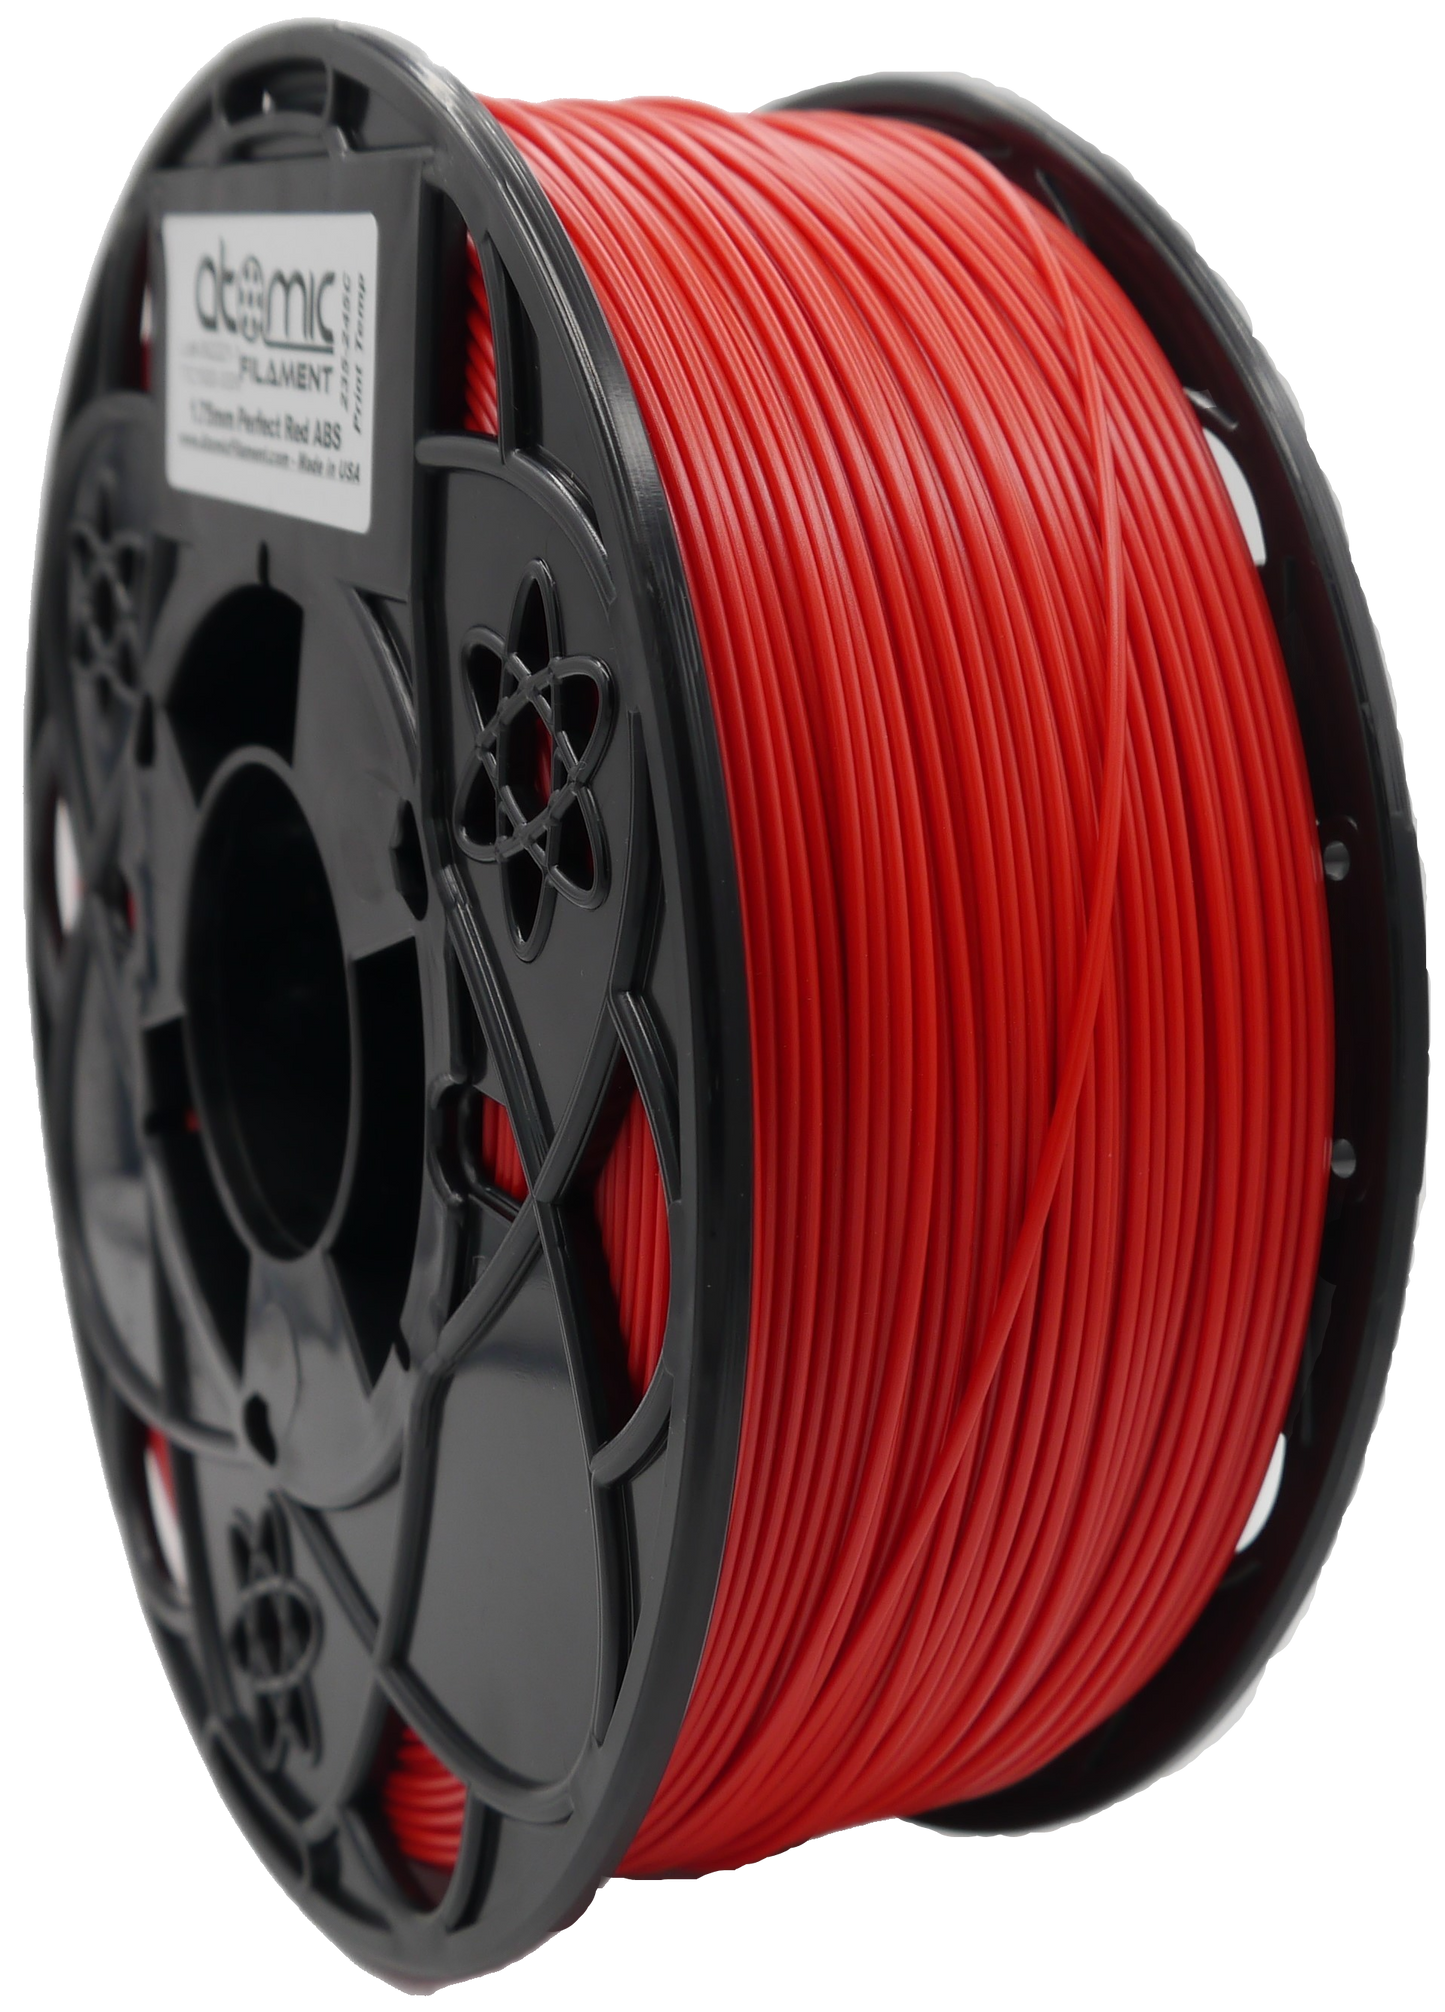 Perfect Red ABS Filament